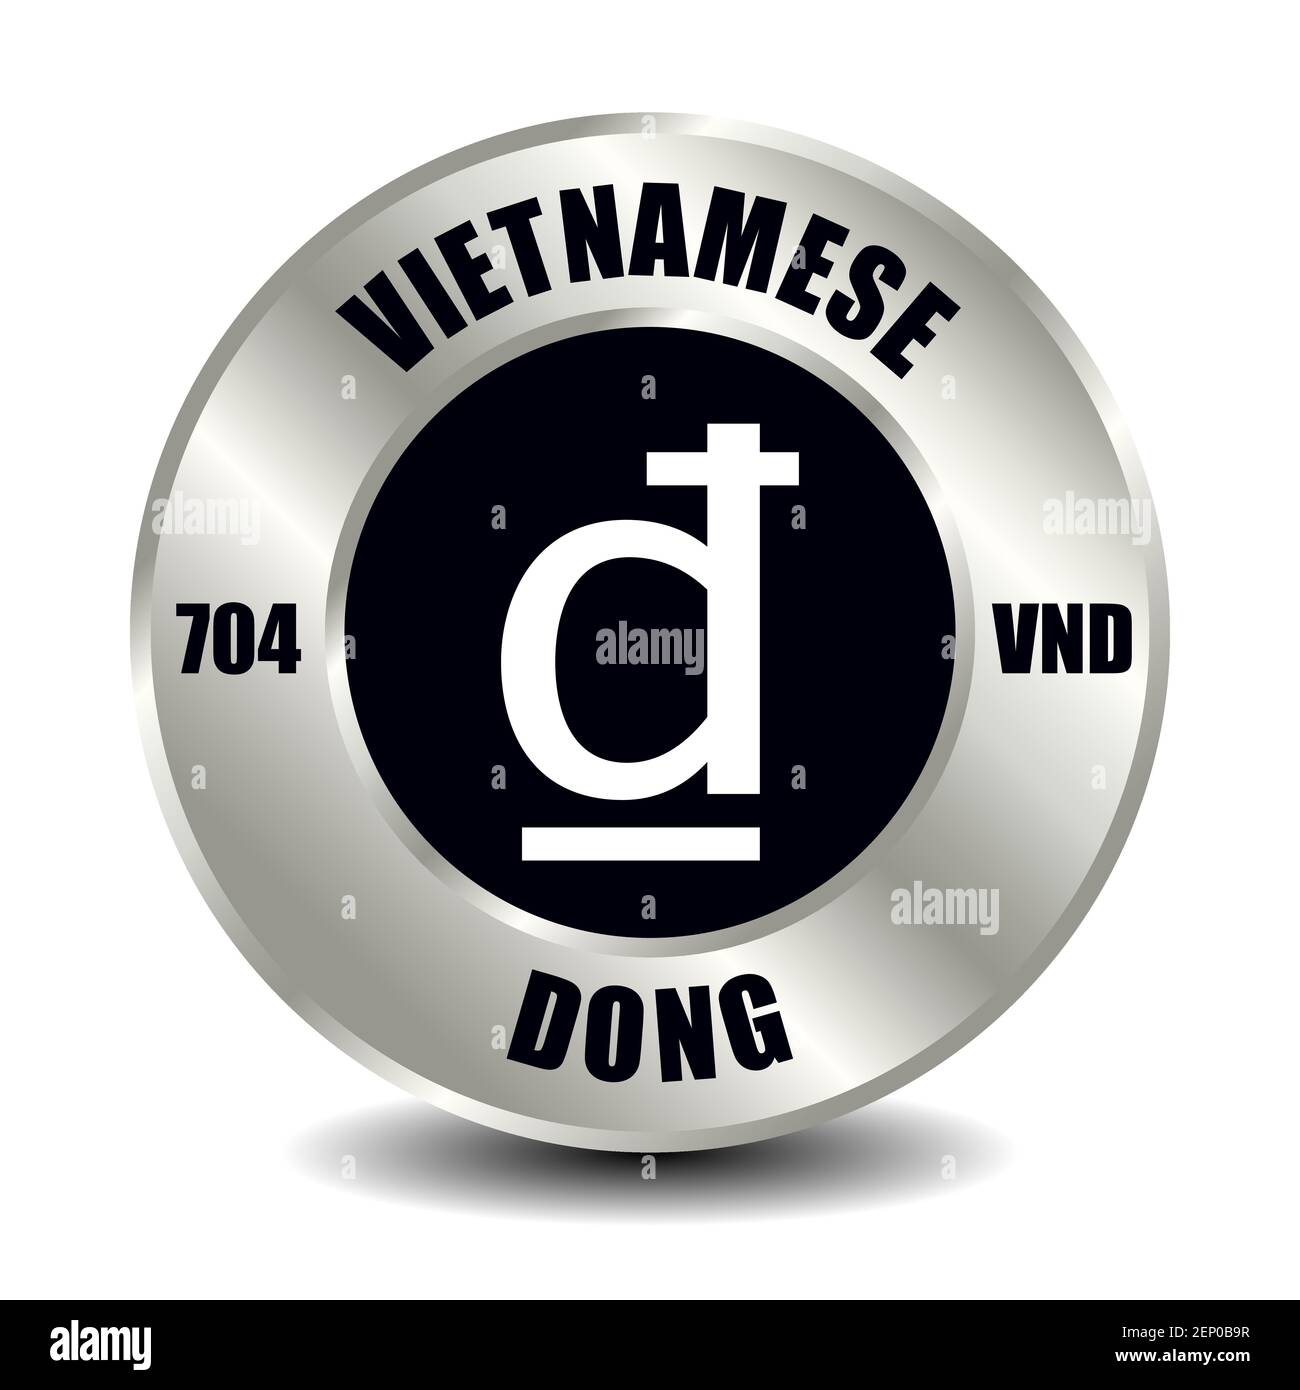 Vietnam money icon isolated on round silver coin. Vector sign of currency symbol with international ISO code and abbreviation Stock Vector